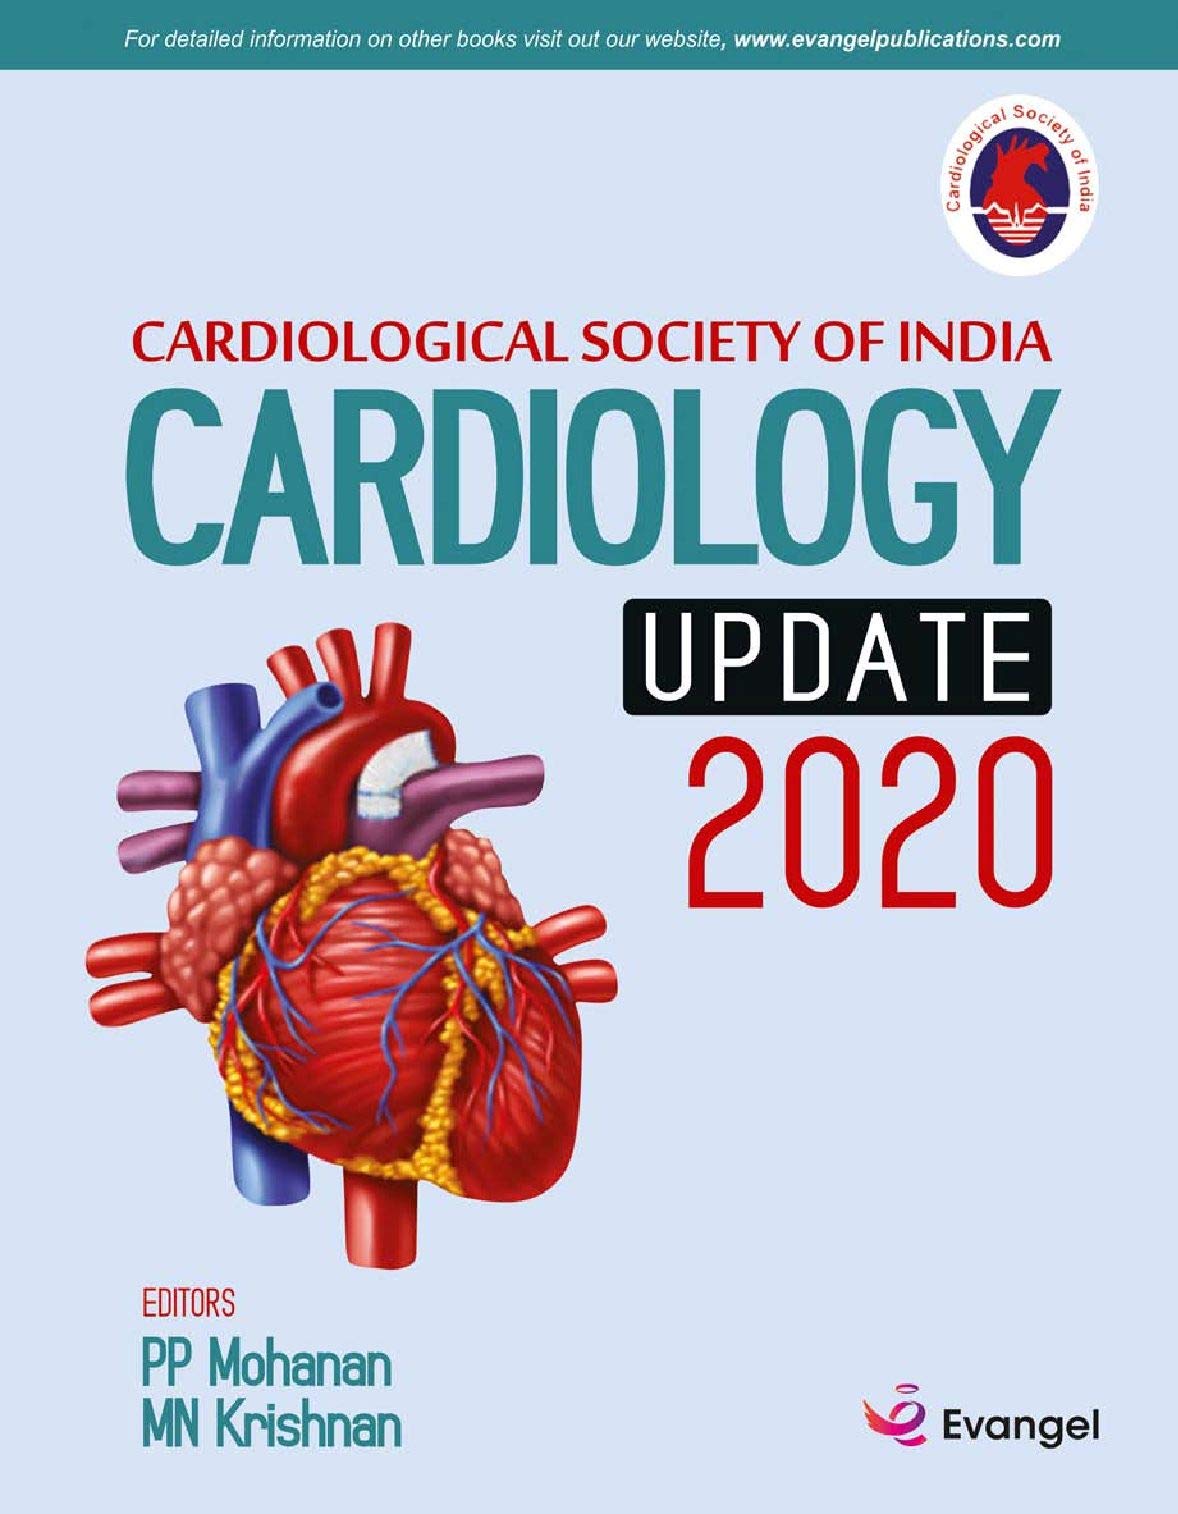 Cardiology Update 2020